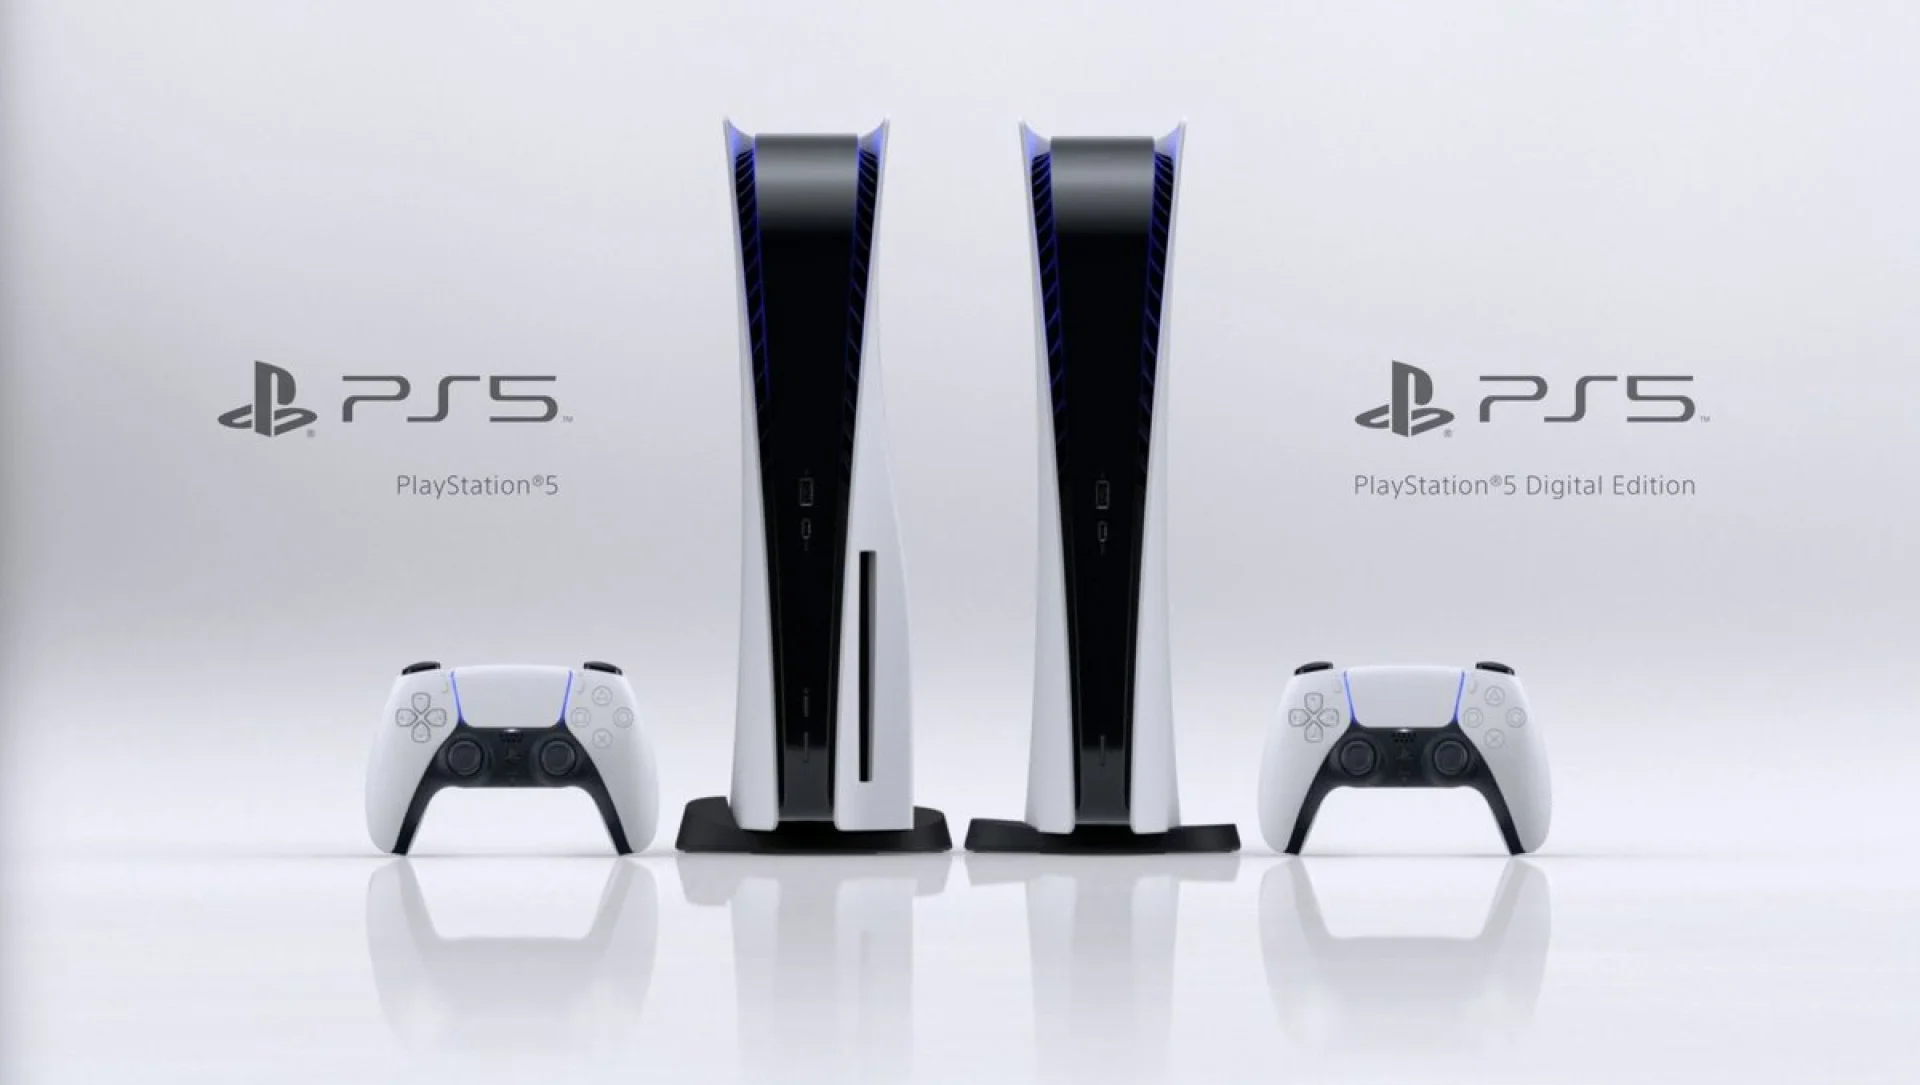 Sony announced the PlayStation 5 Consoles!